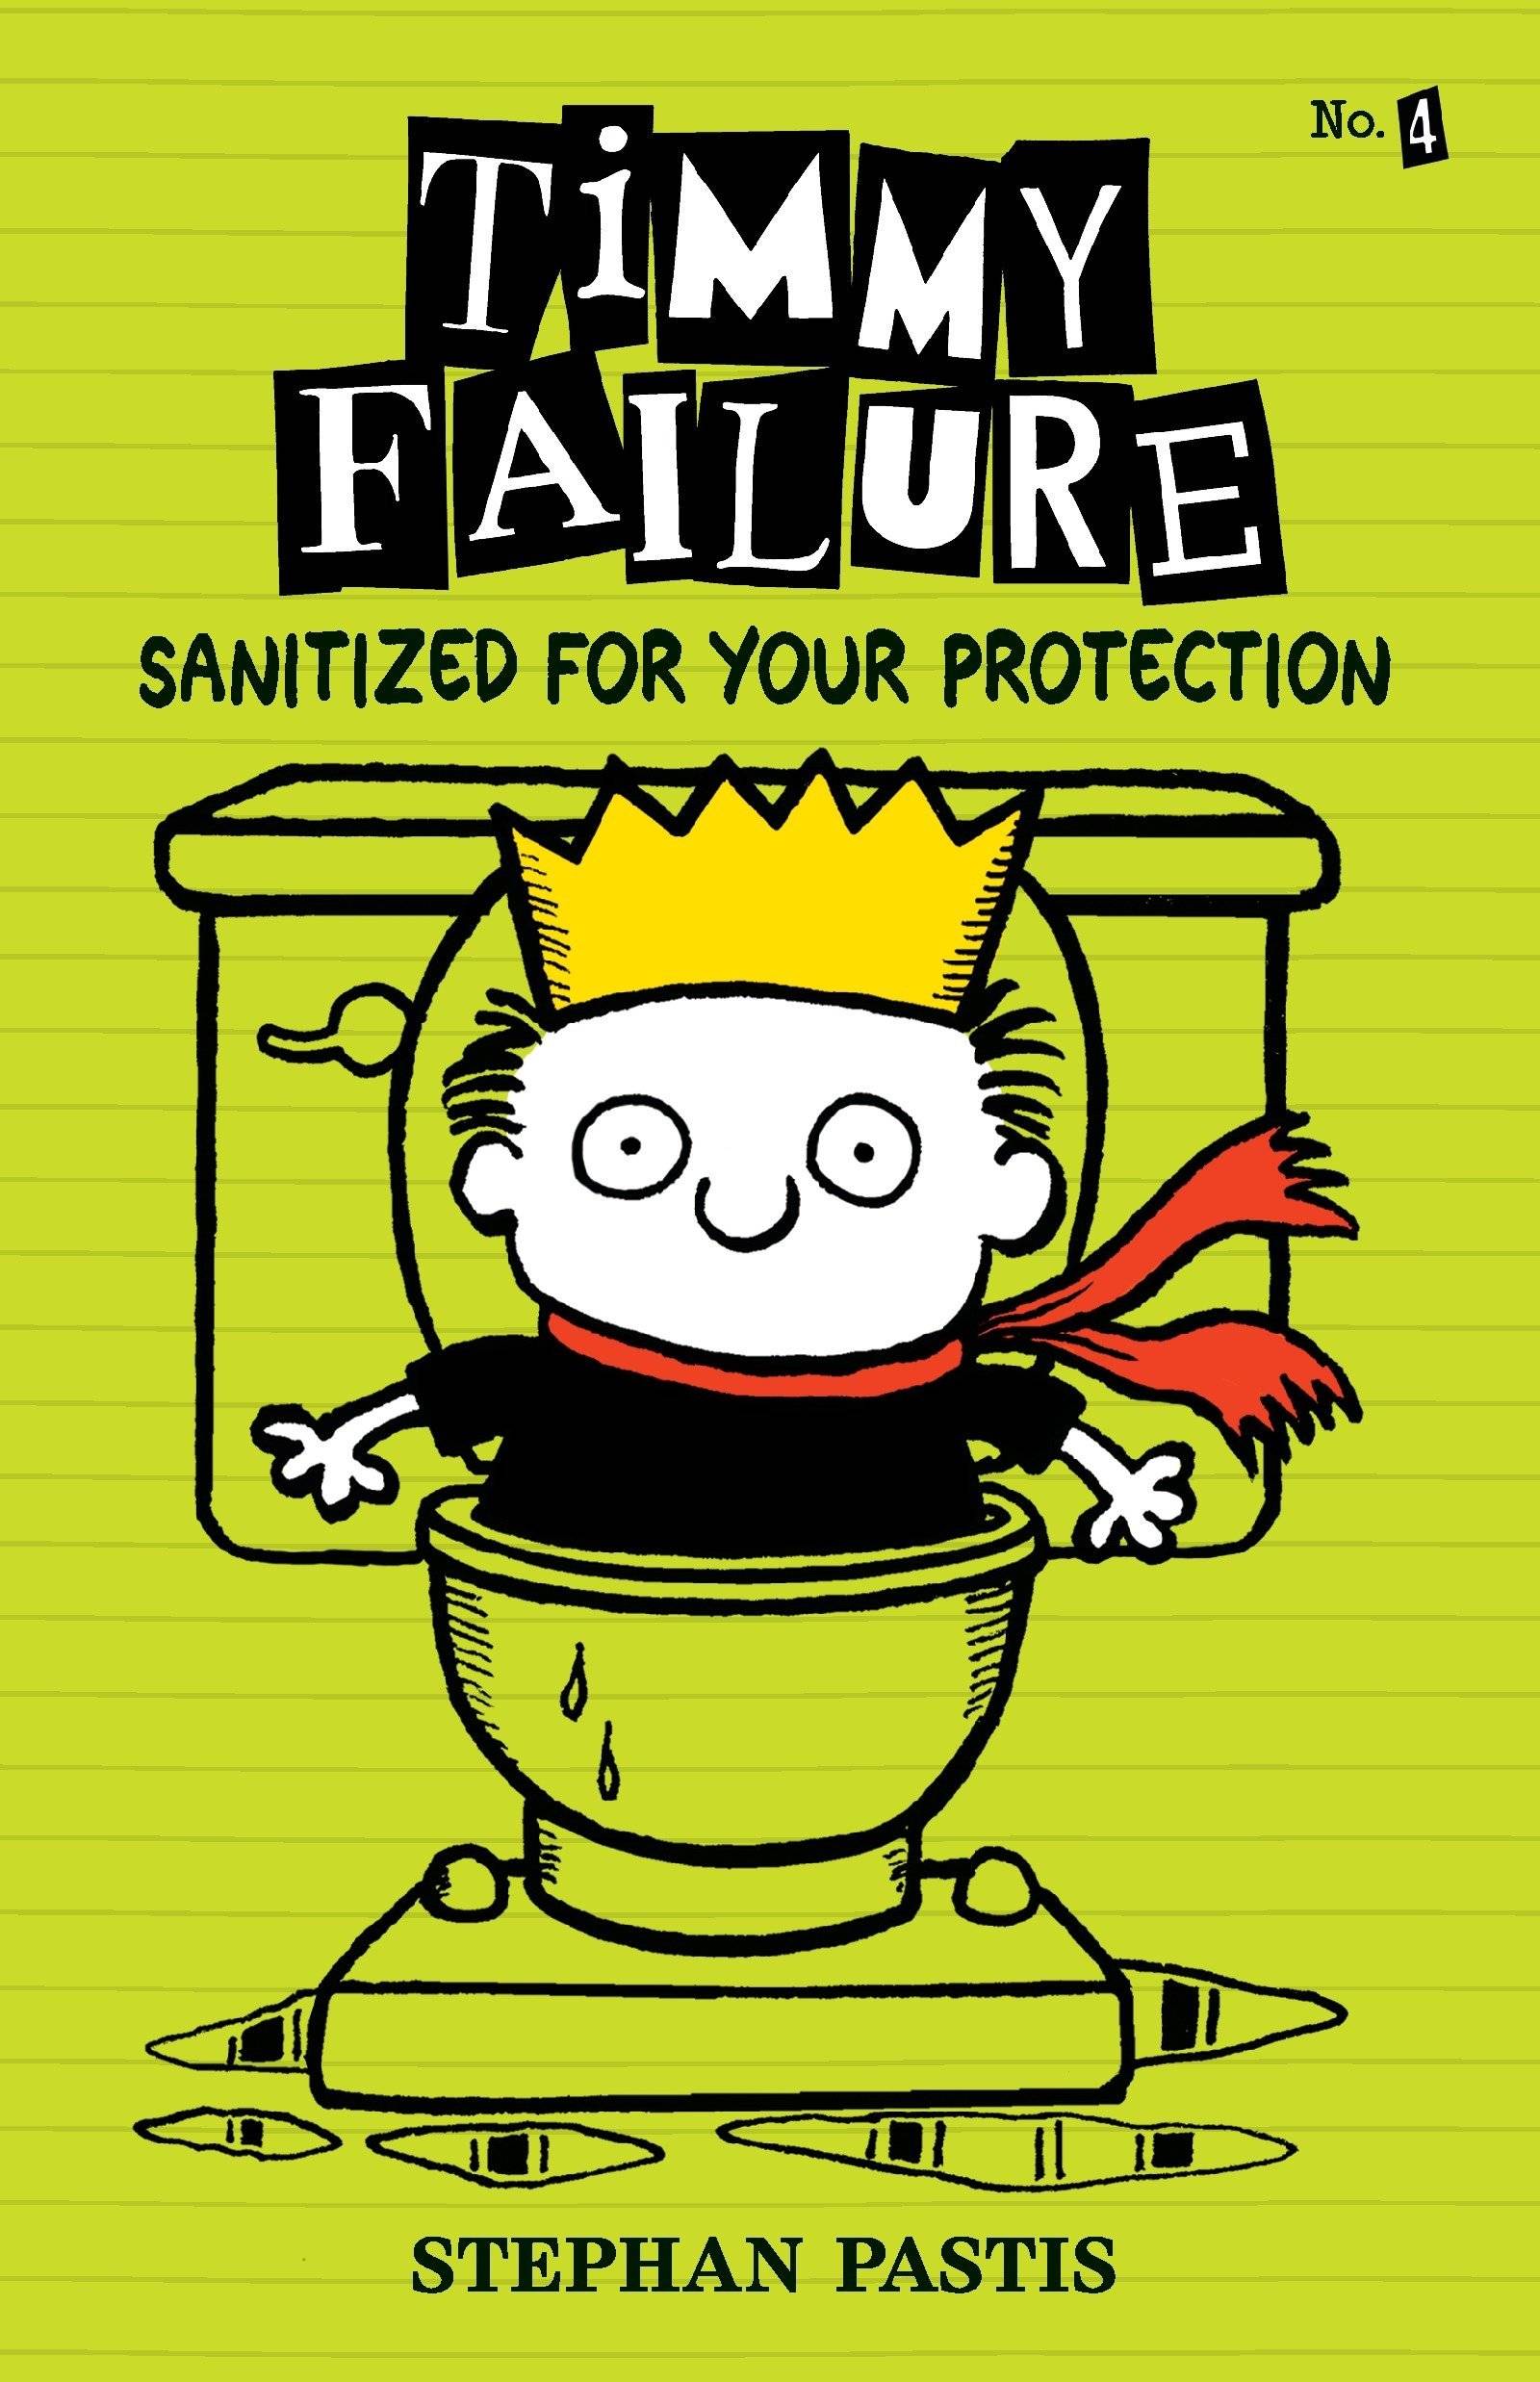 IMG : Timmy Failure Sanitized for your protection#4